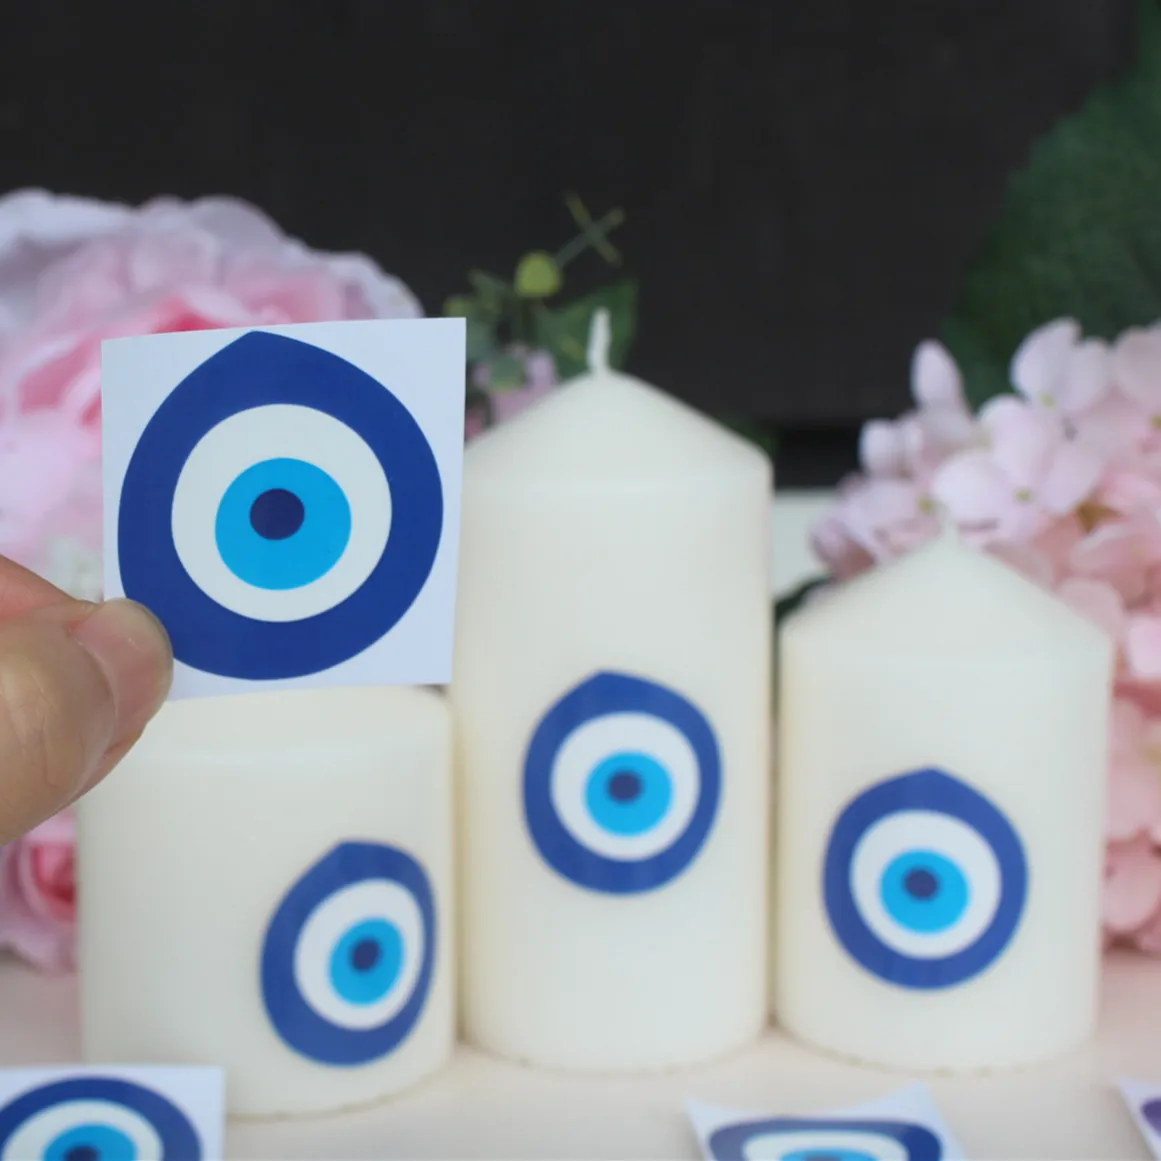 Candela Evil Eye Decals Stickers Lucky Good Candle Protection Eye vinyl sticker decorations ( Candle not include)